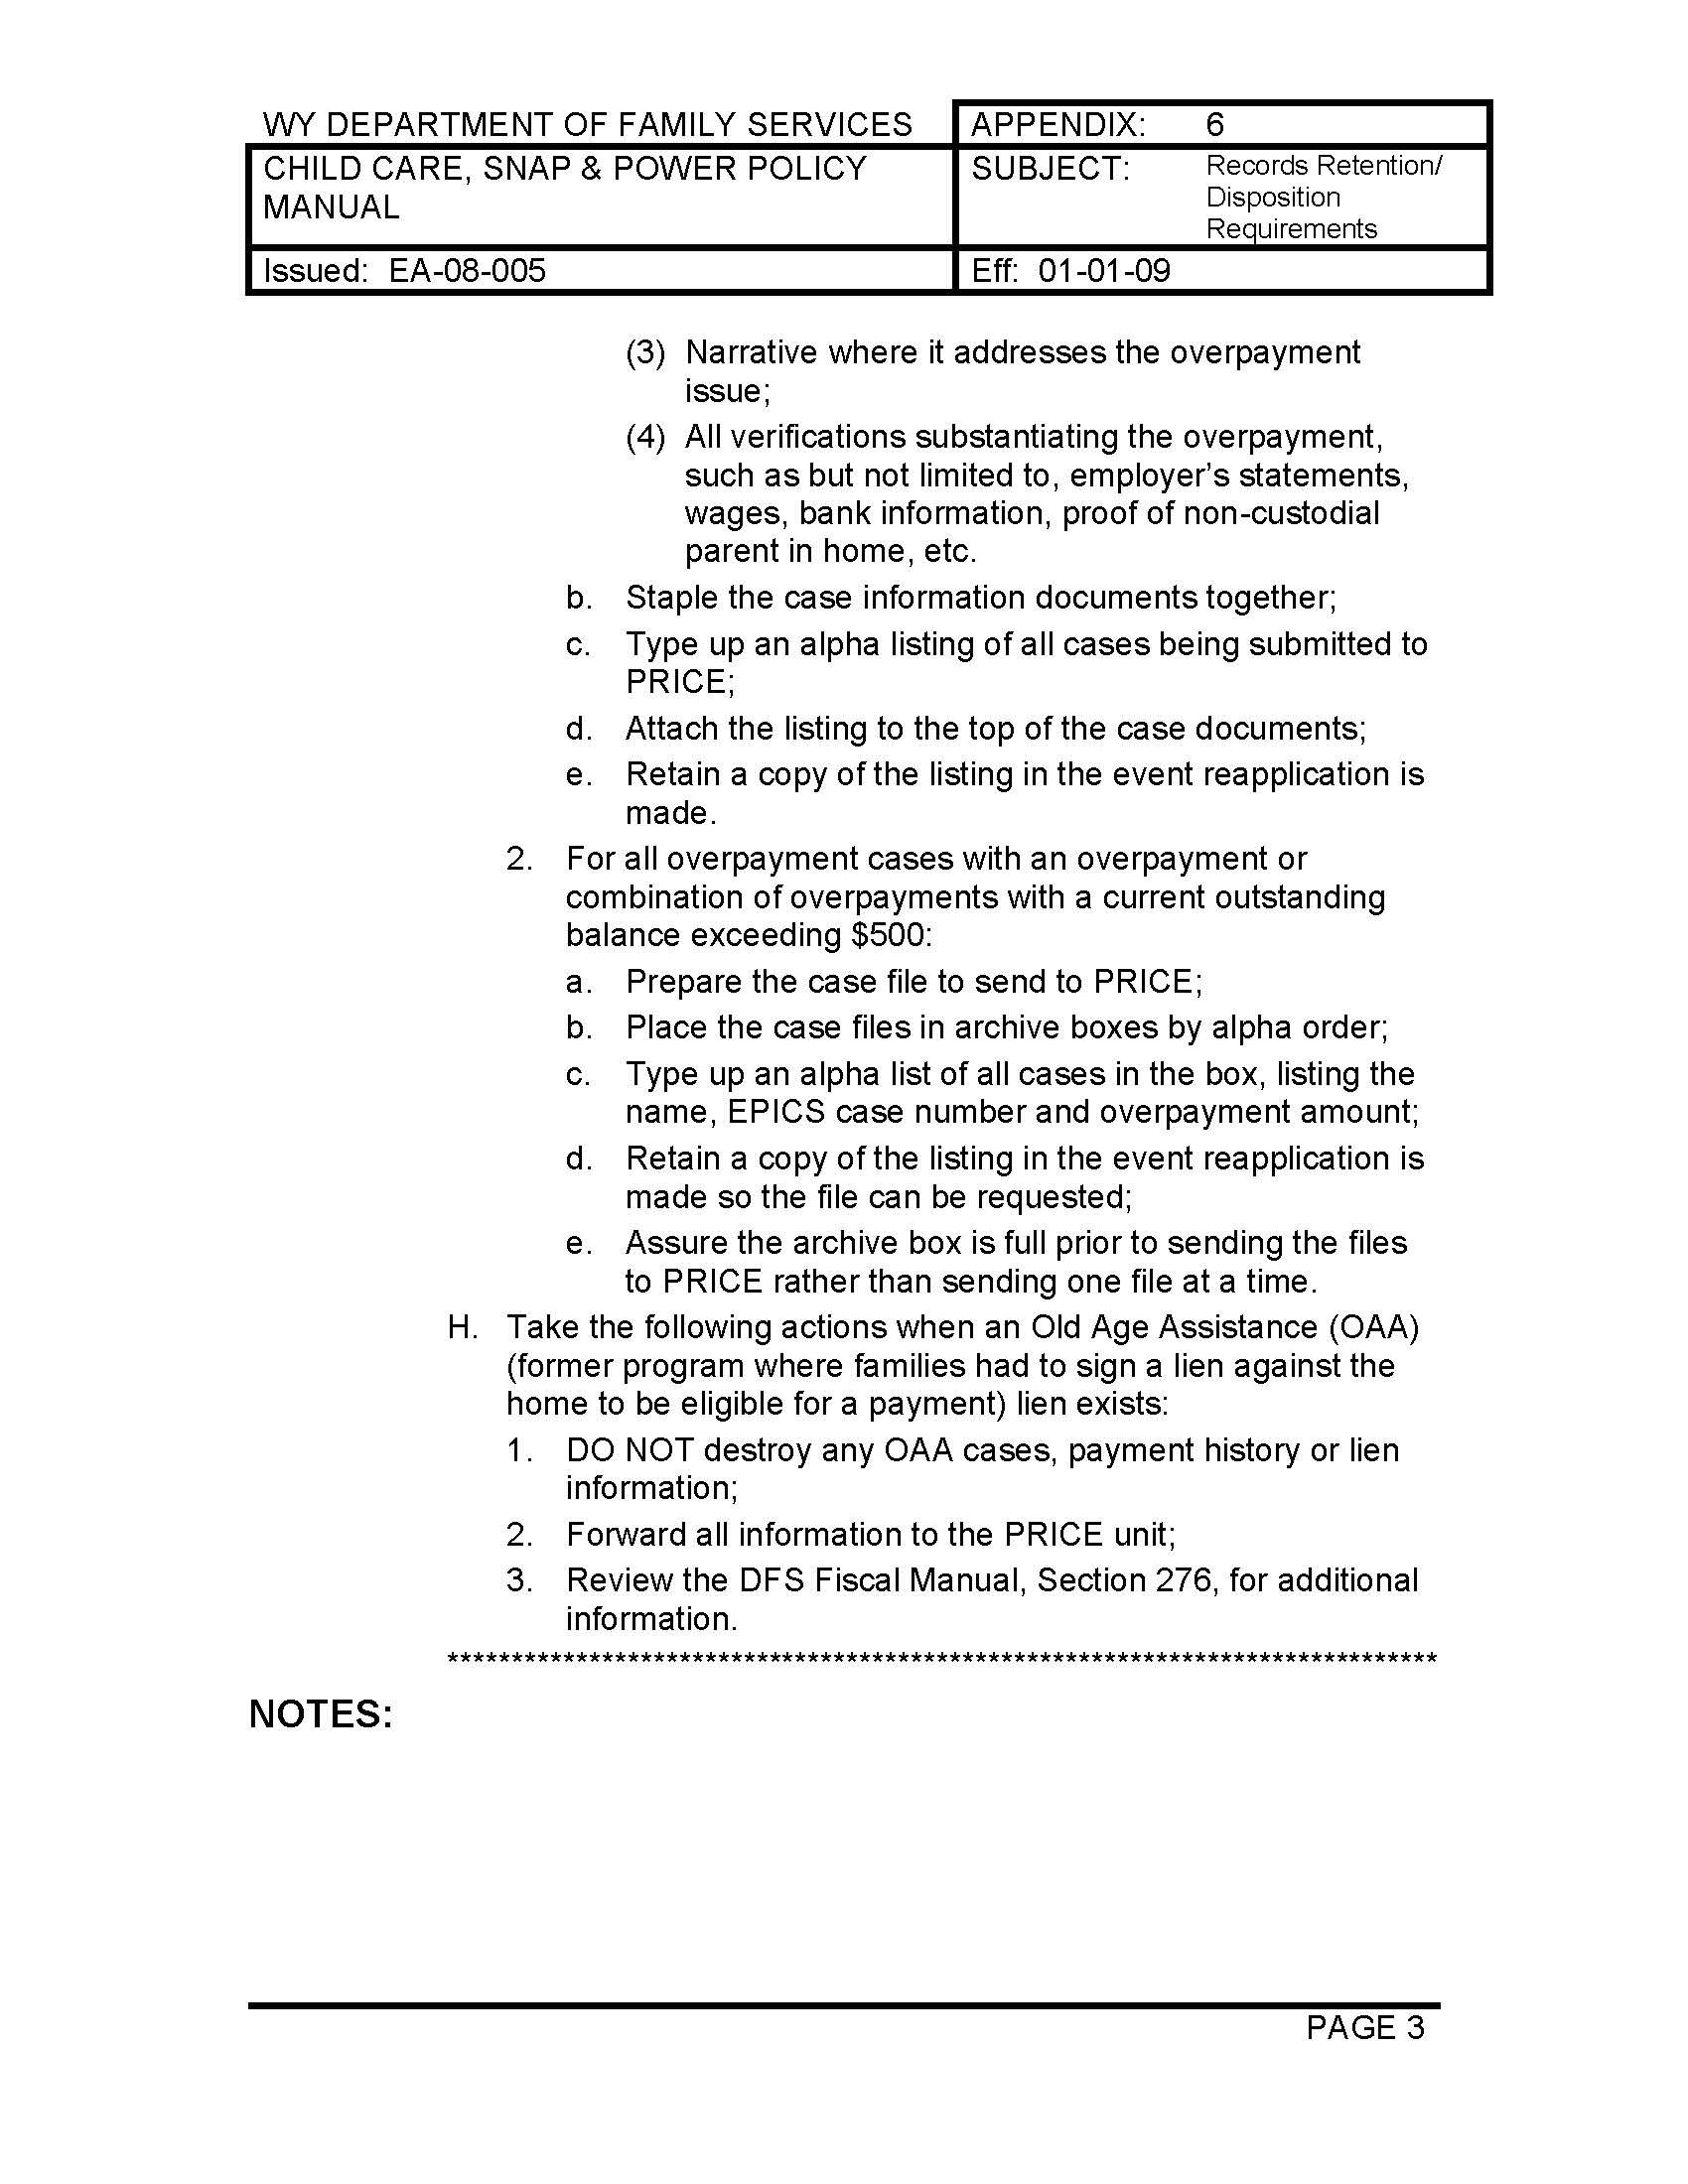 Child-Care-Policy-Manual-Appendix-6-Records-Retention-Disposition-Requirements-Page-3